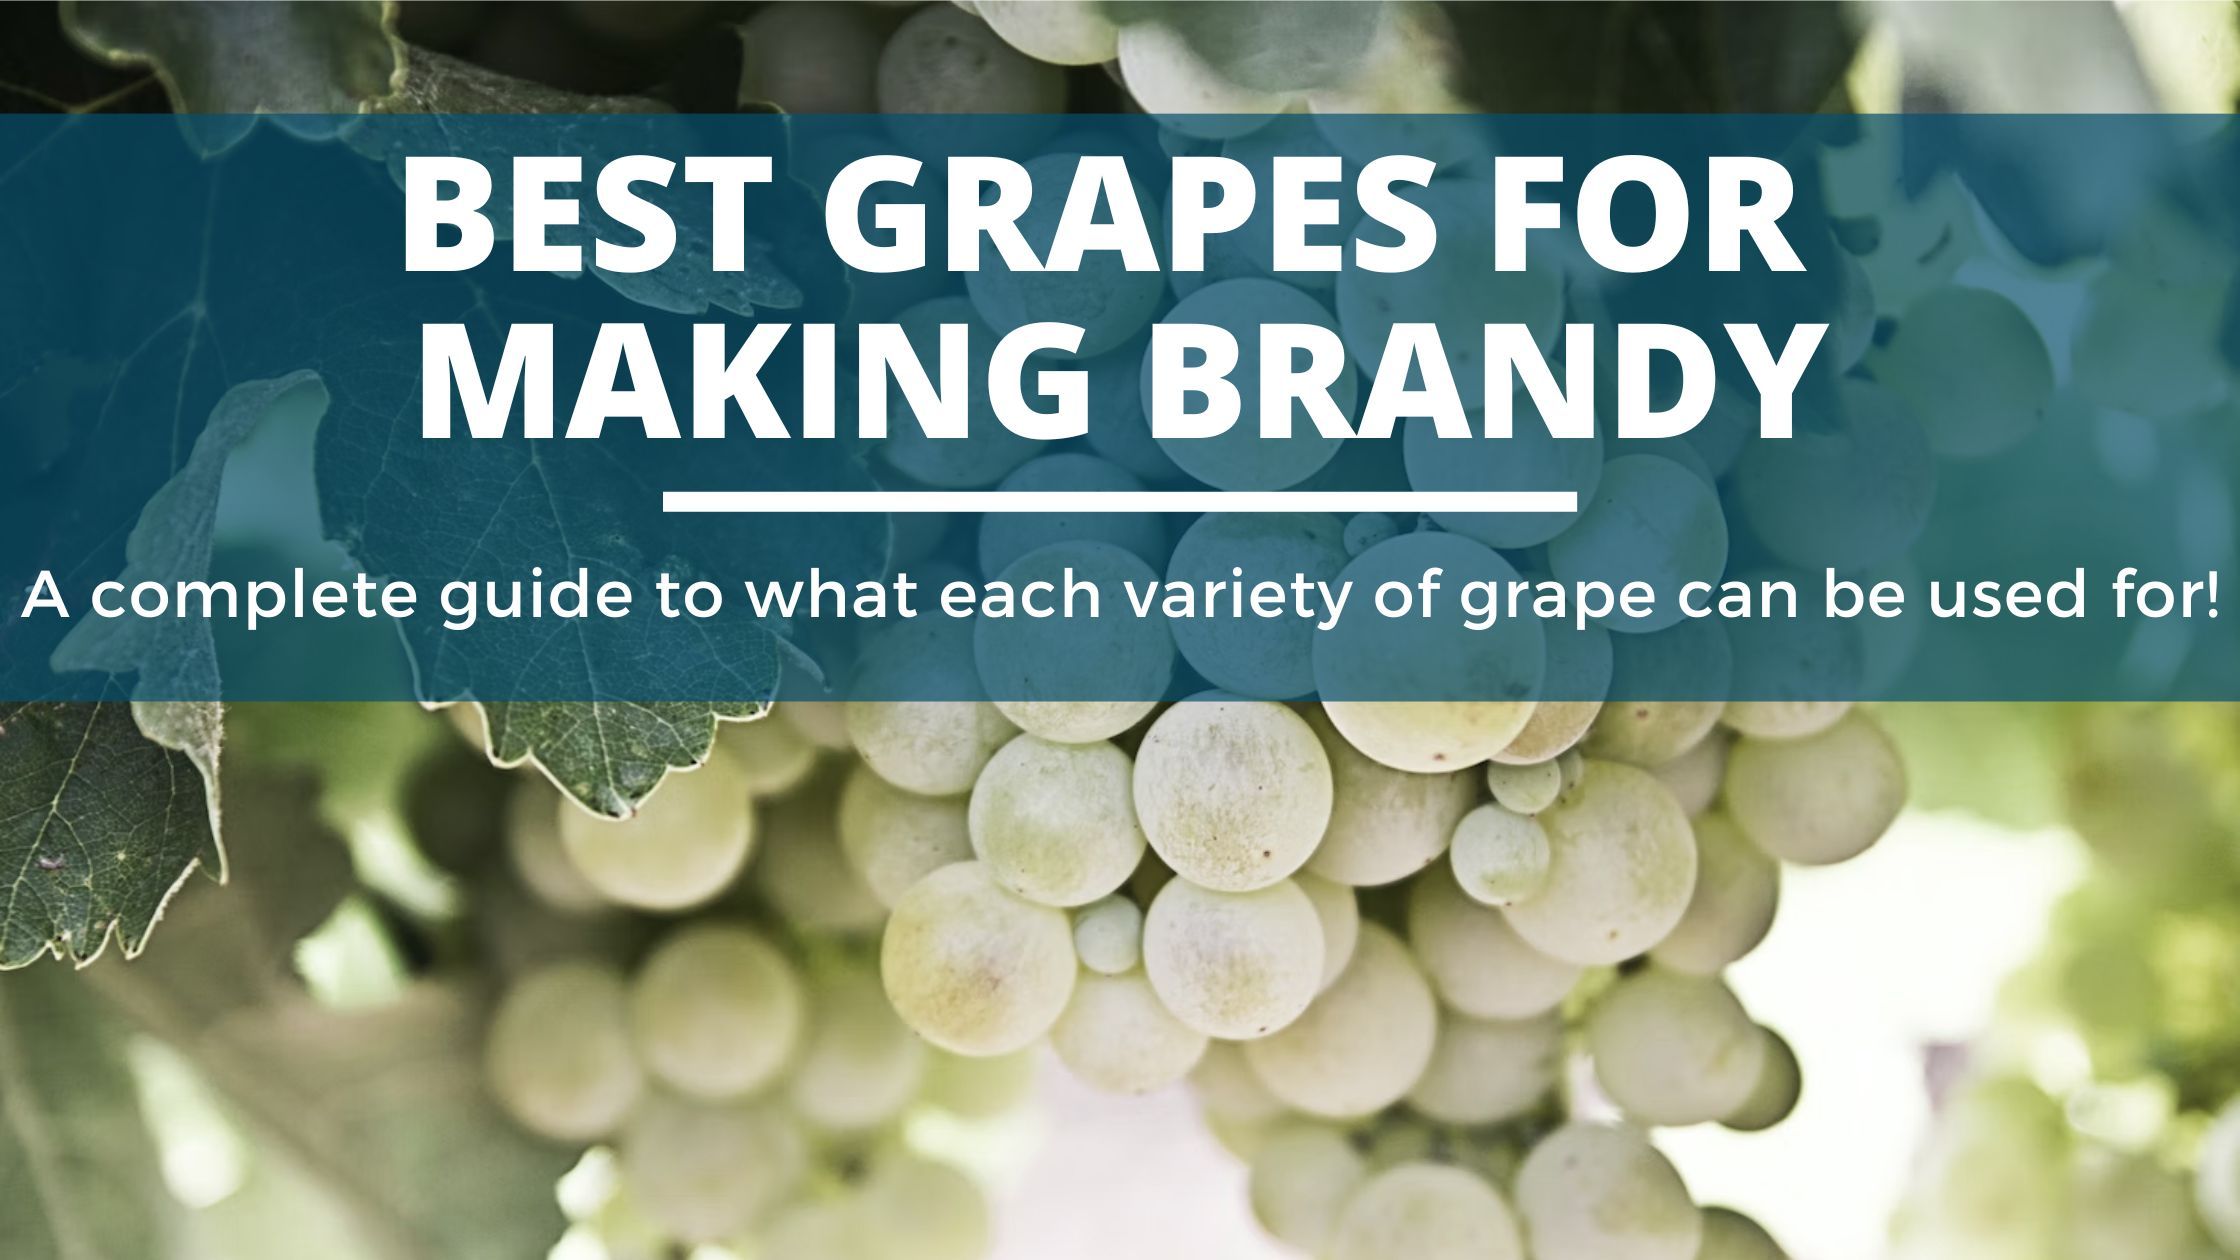 Image of diy distilling what are the best grapes for making brandy